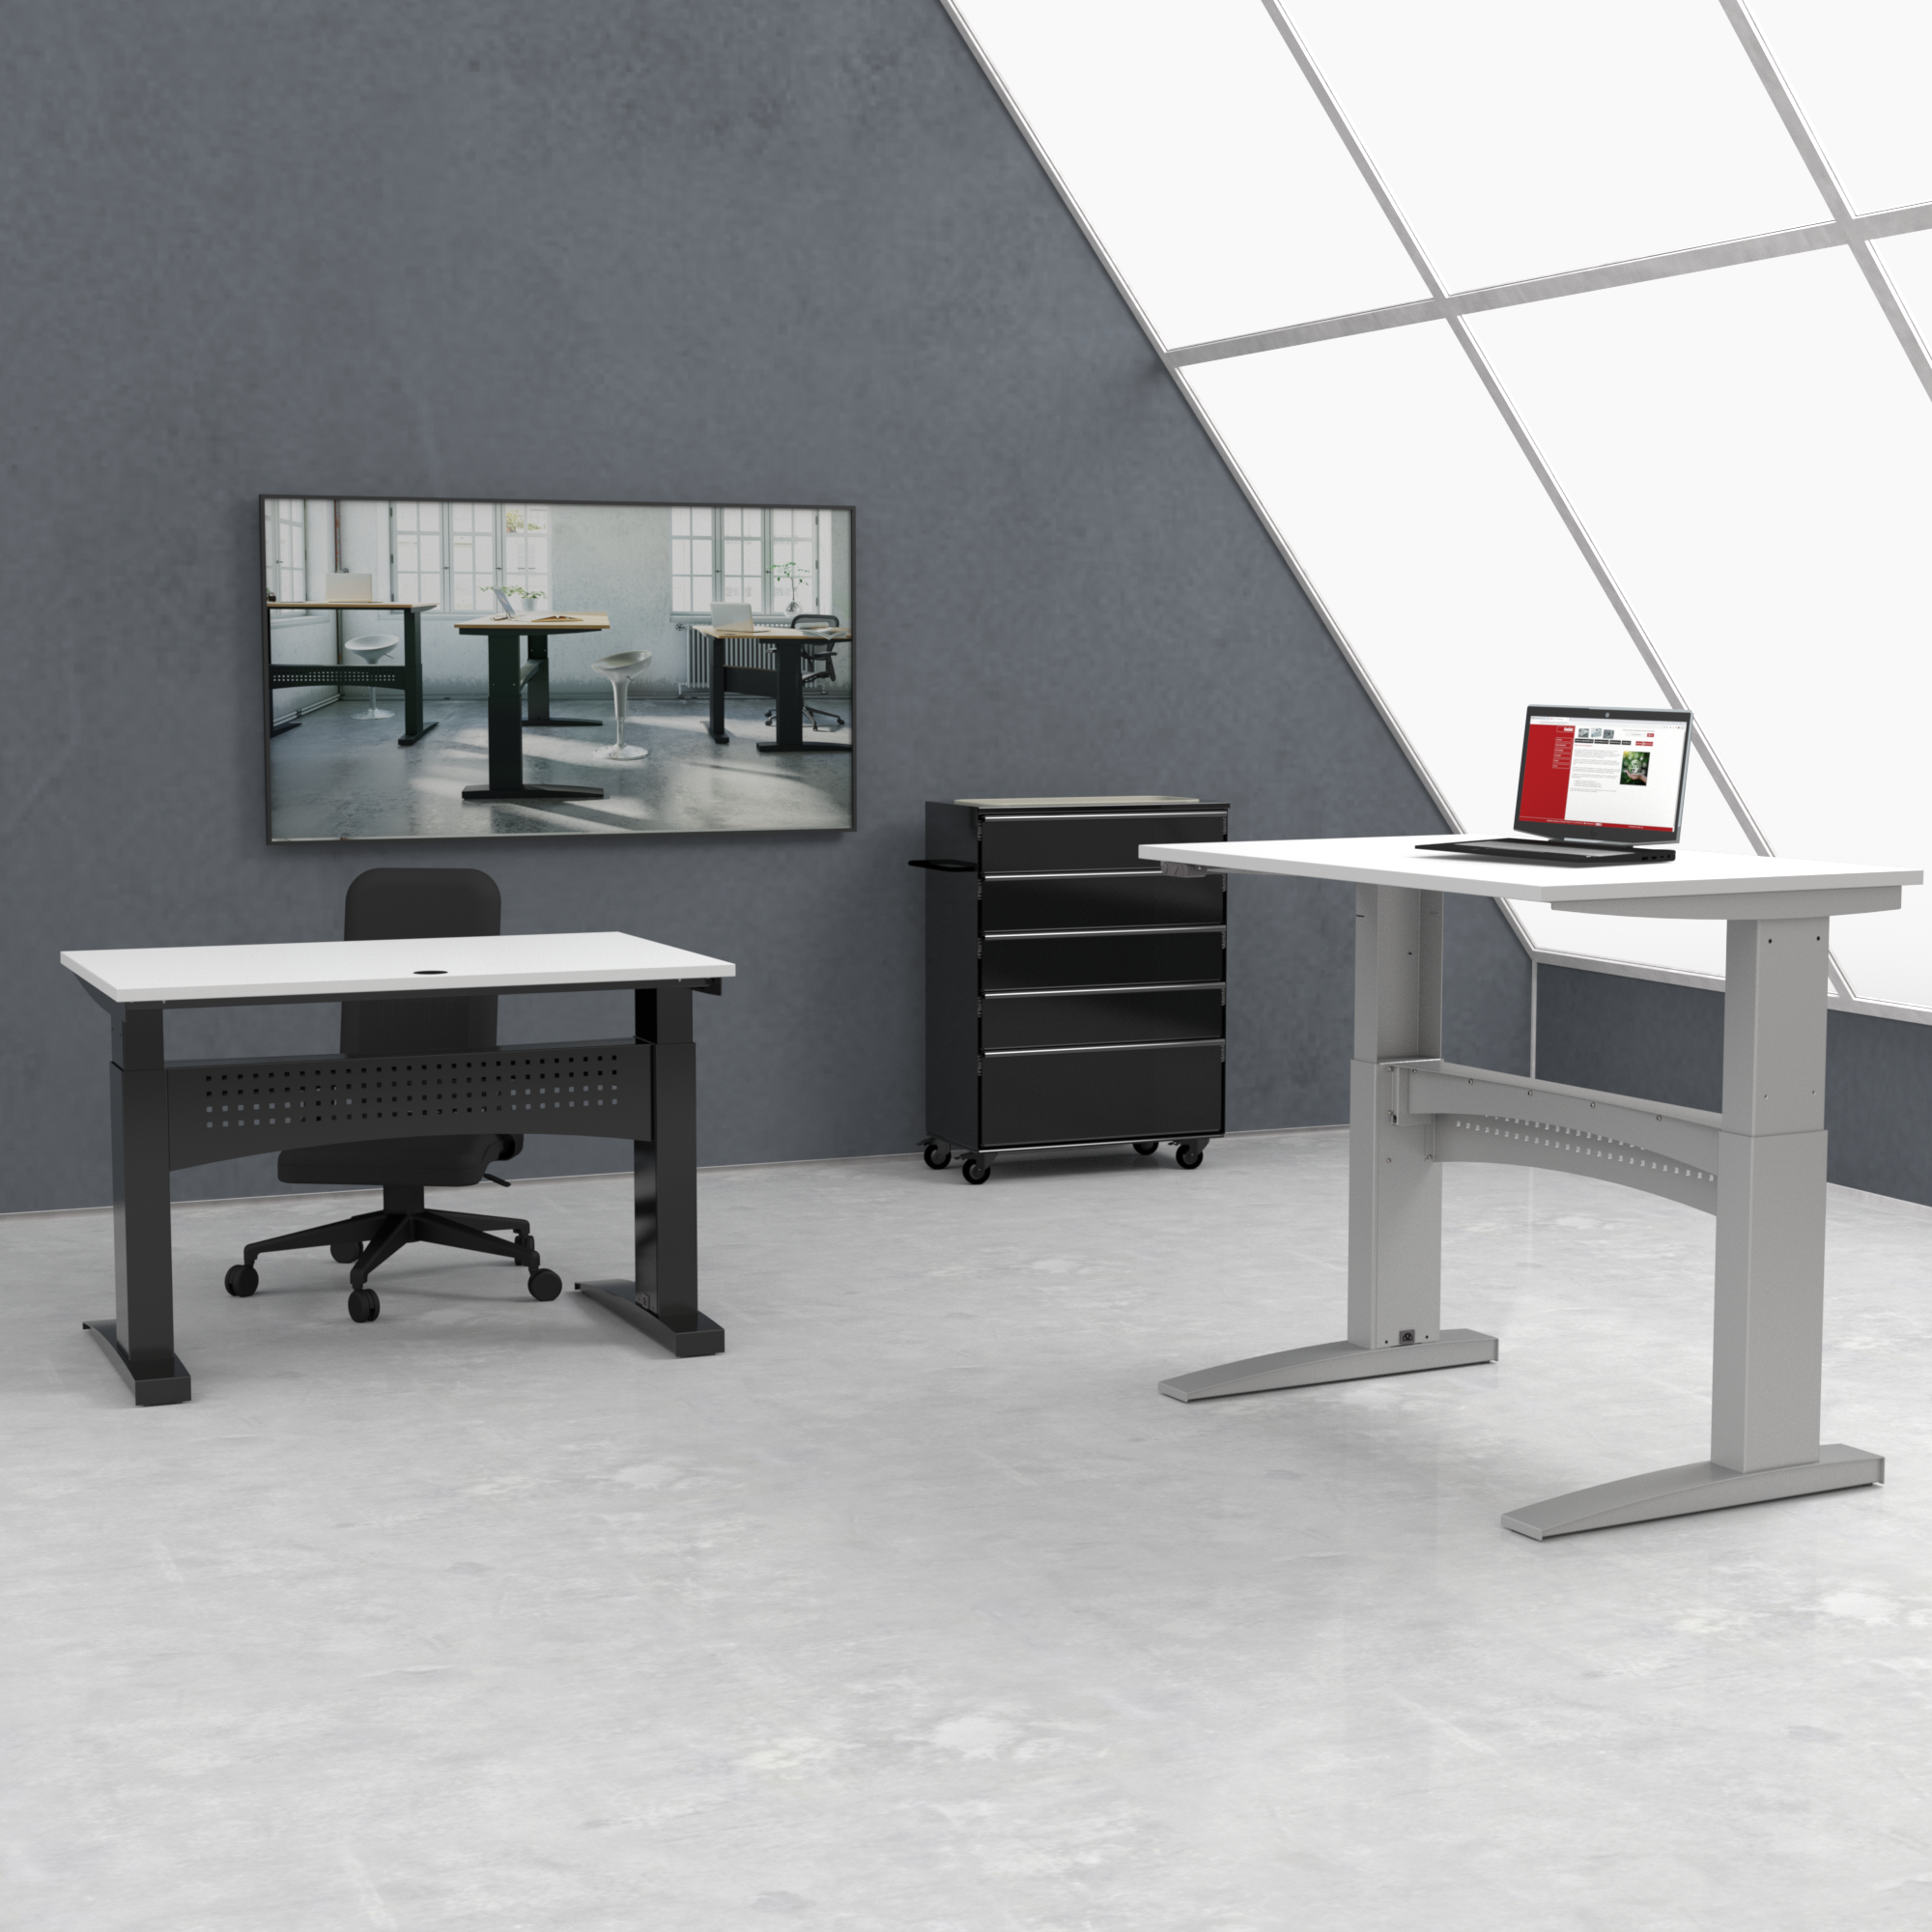 Electric Adjustable Desk | 120x80 cm | White with silver frame